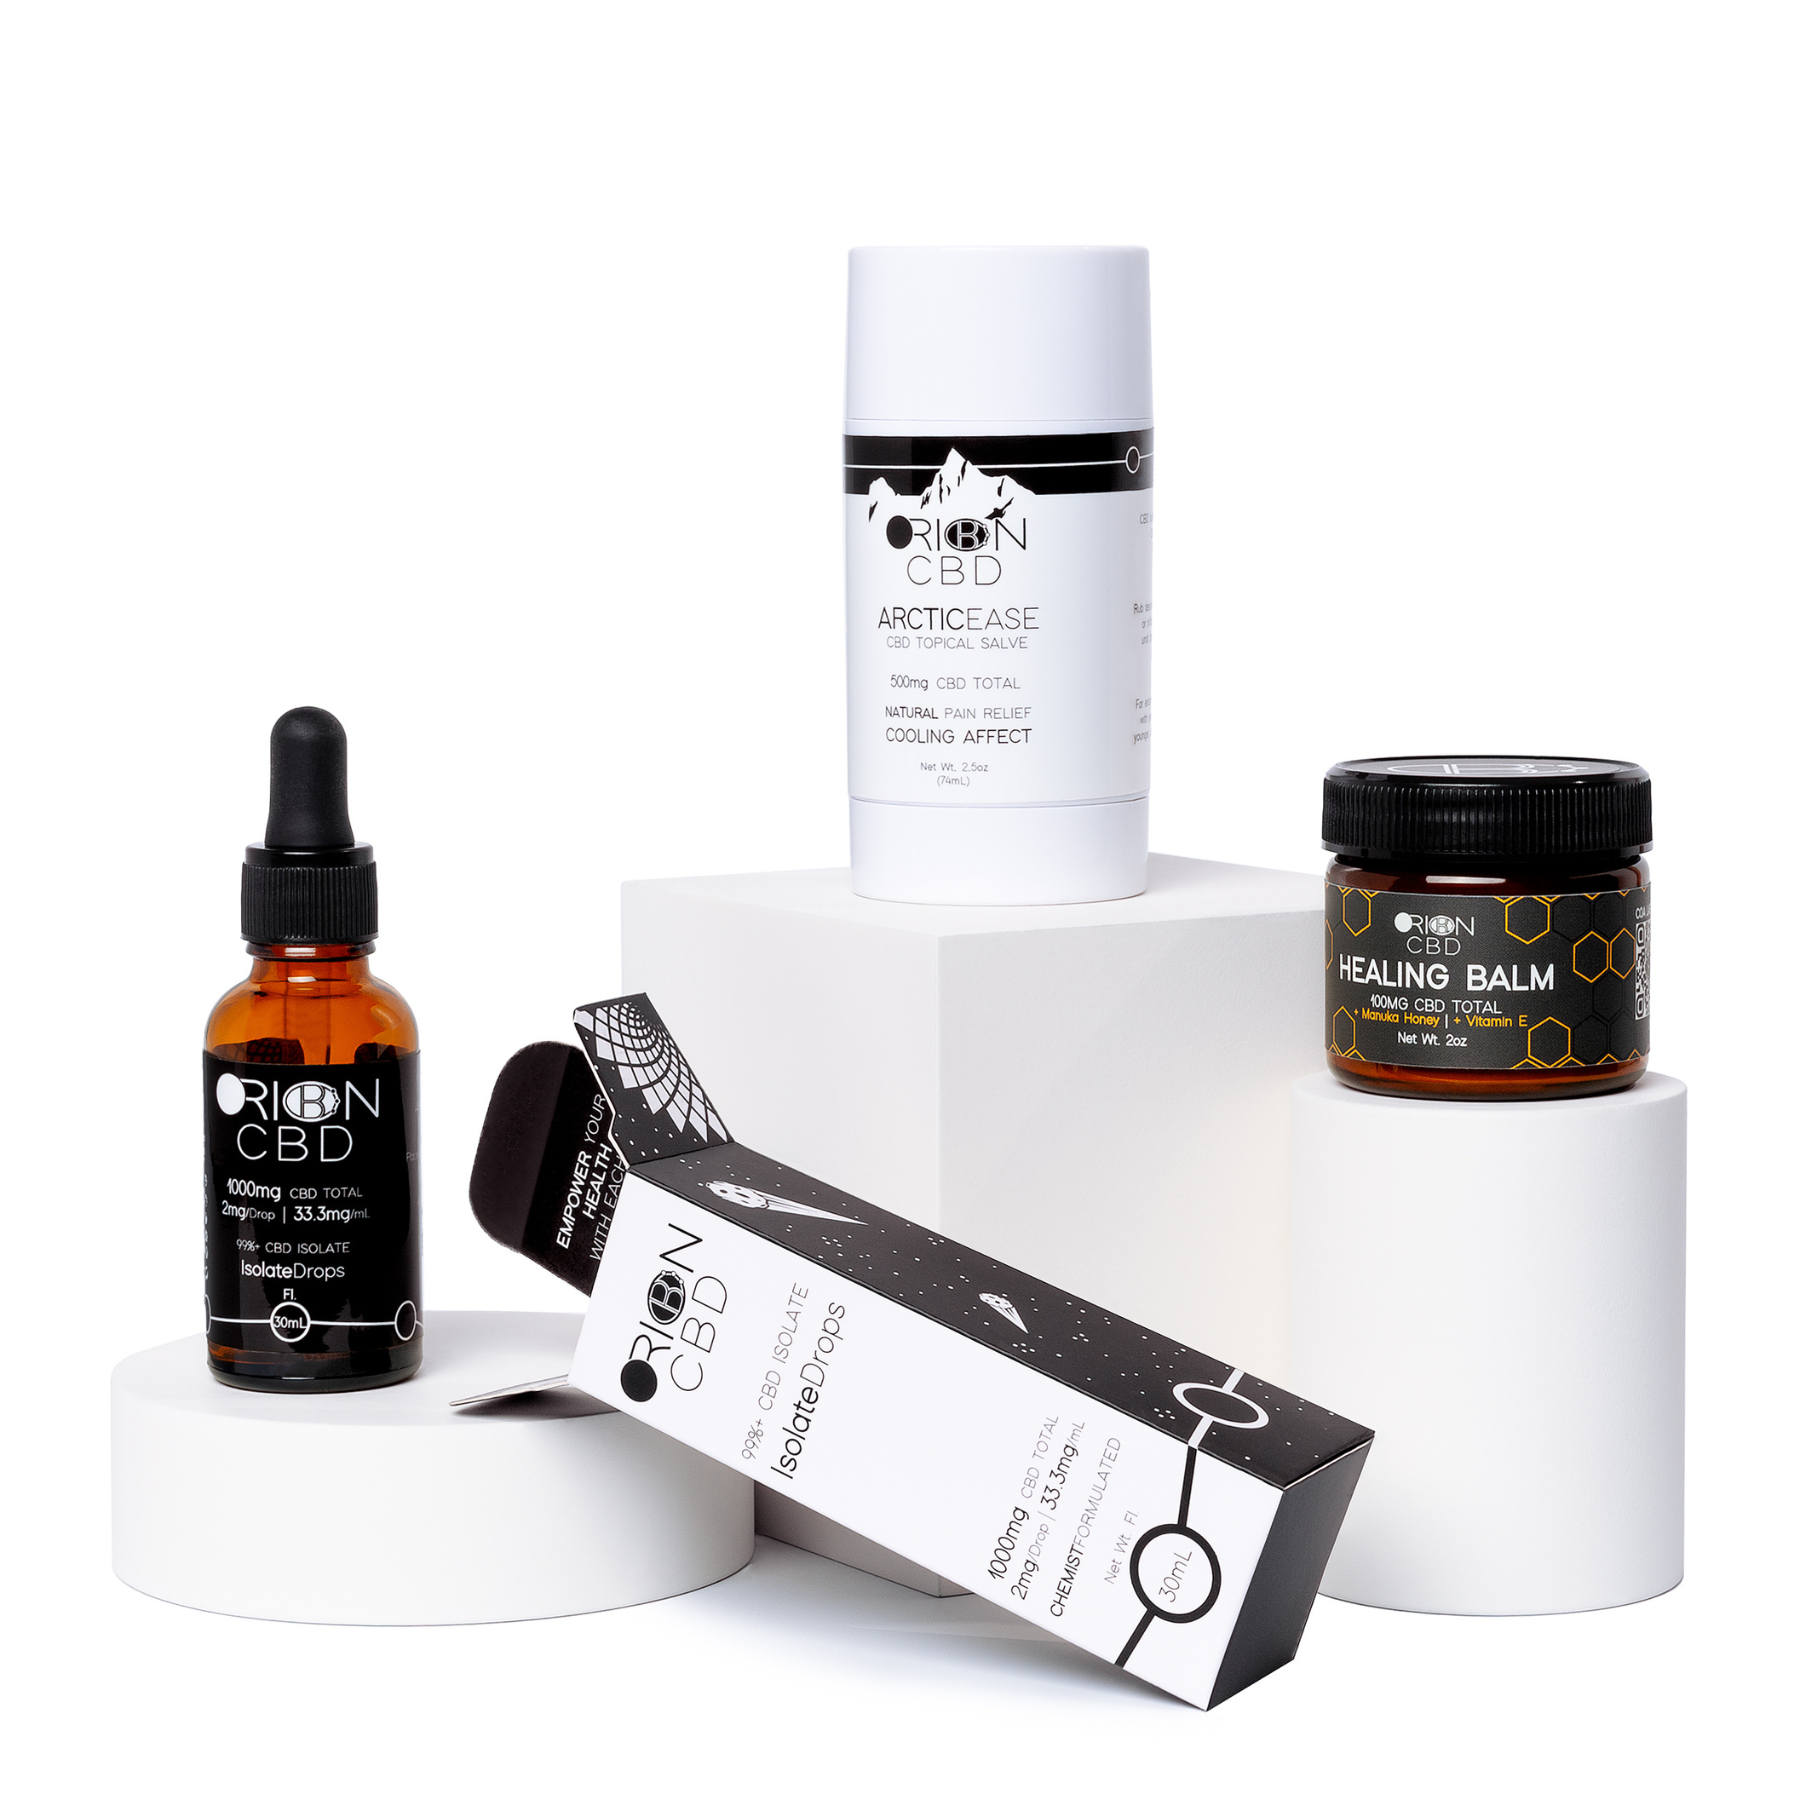 Orion CBD Recovery Bundle featuring Isolate Drops, Healing Balm, and Pain Relief Salve Stick on white blocks with the isolate drops box laying on its side